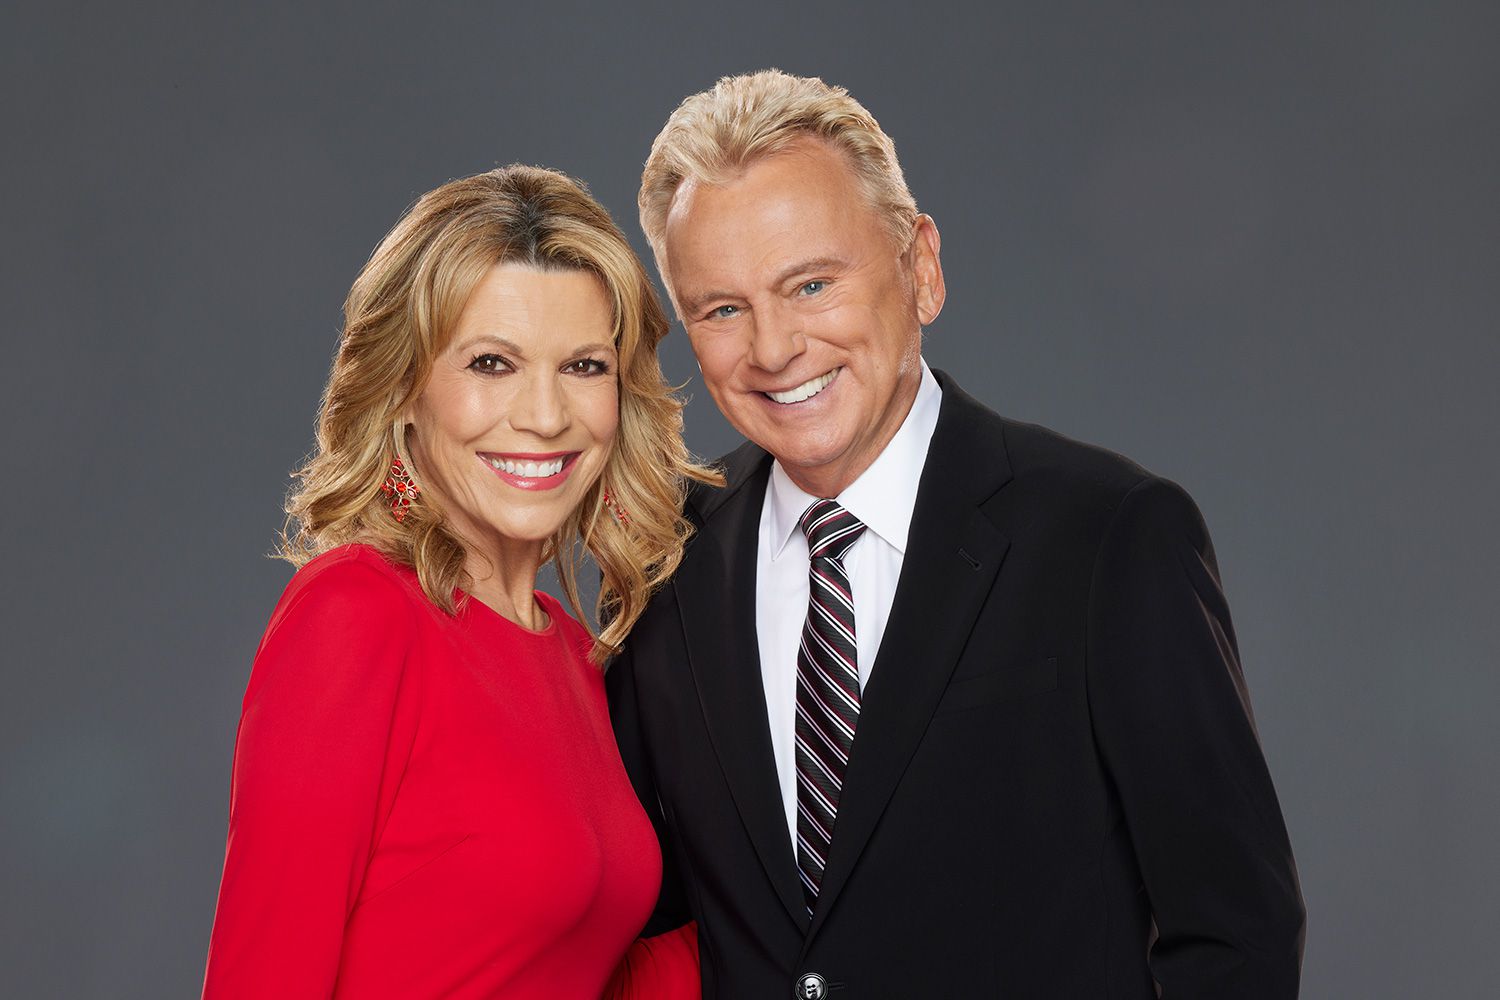 is vanna white and pat sajak married